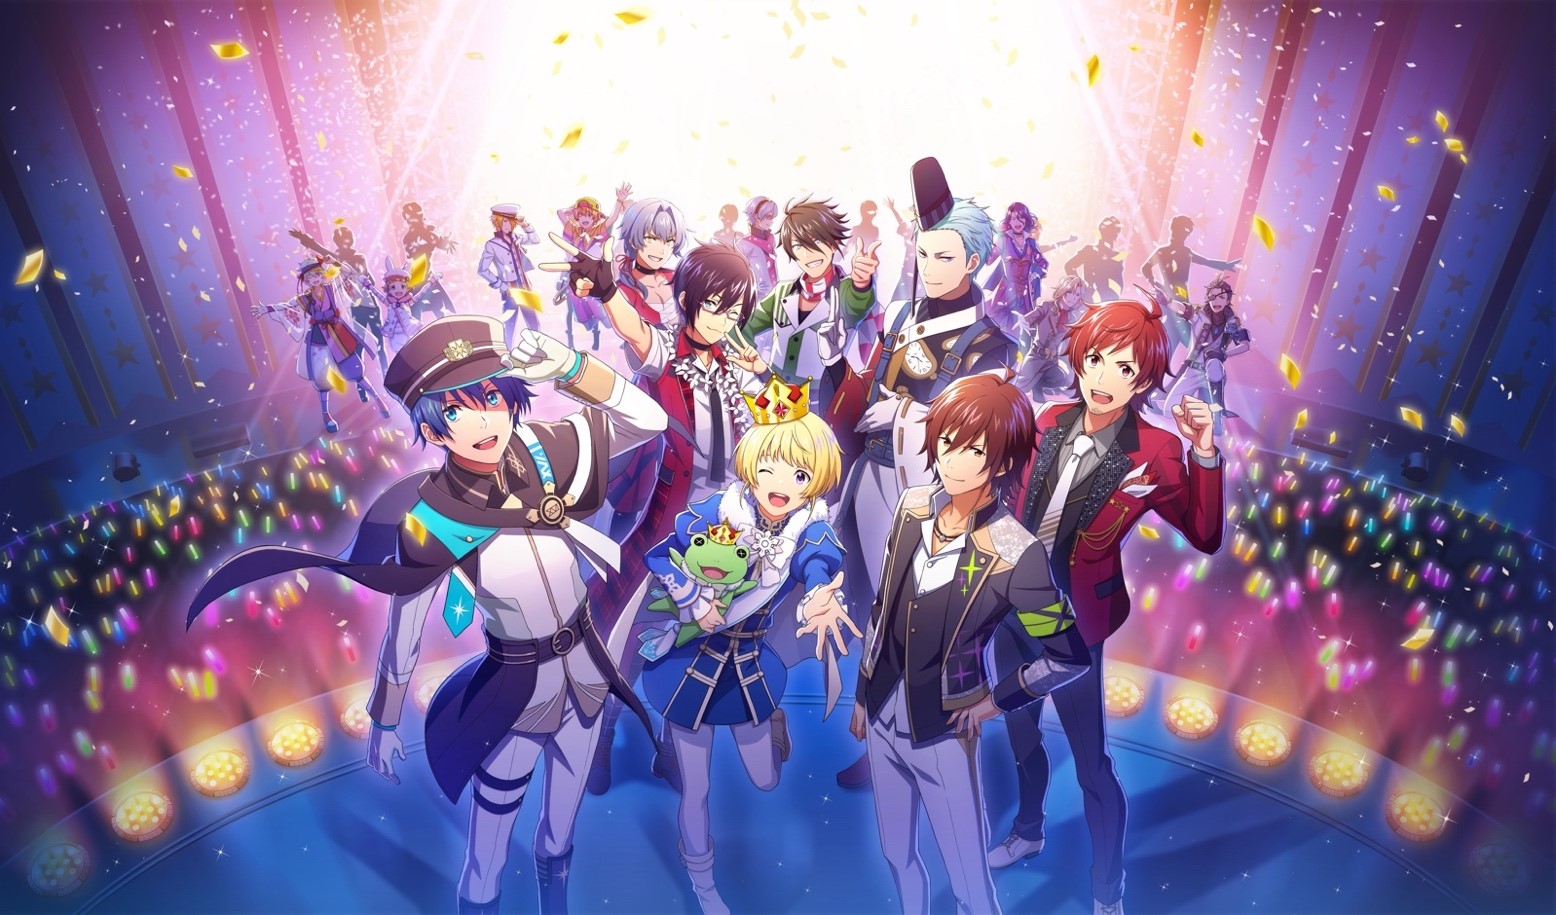 450 Songs from Popular Game The Idolmaster: SideM Released on 